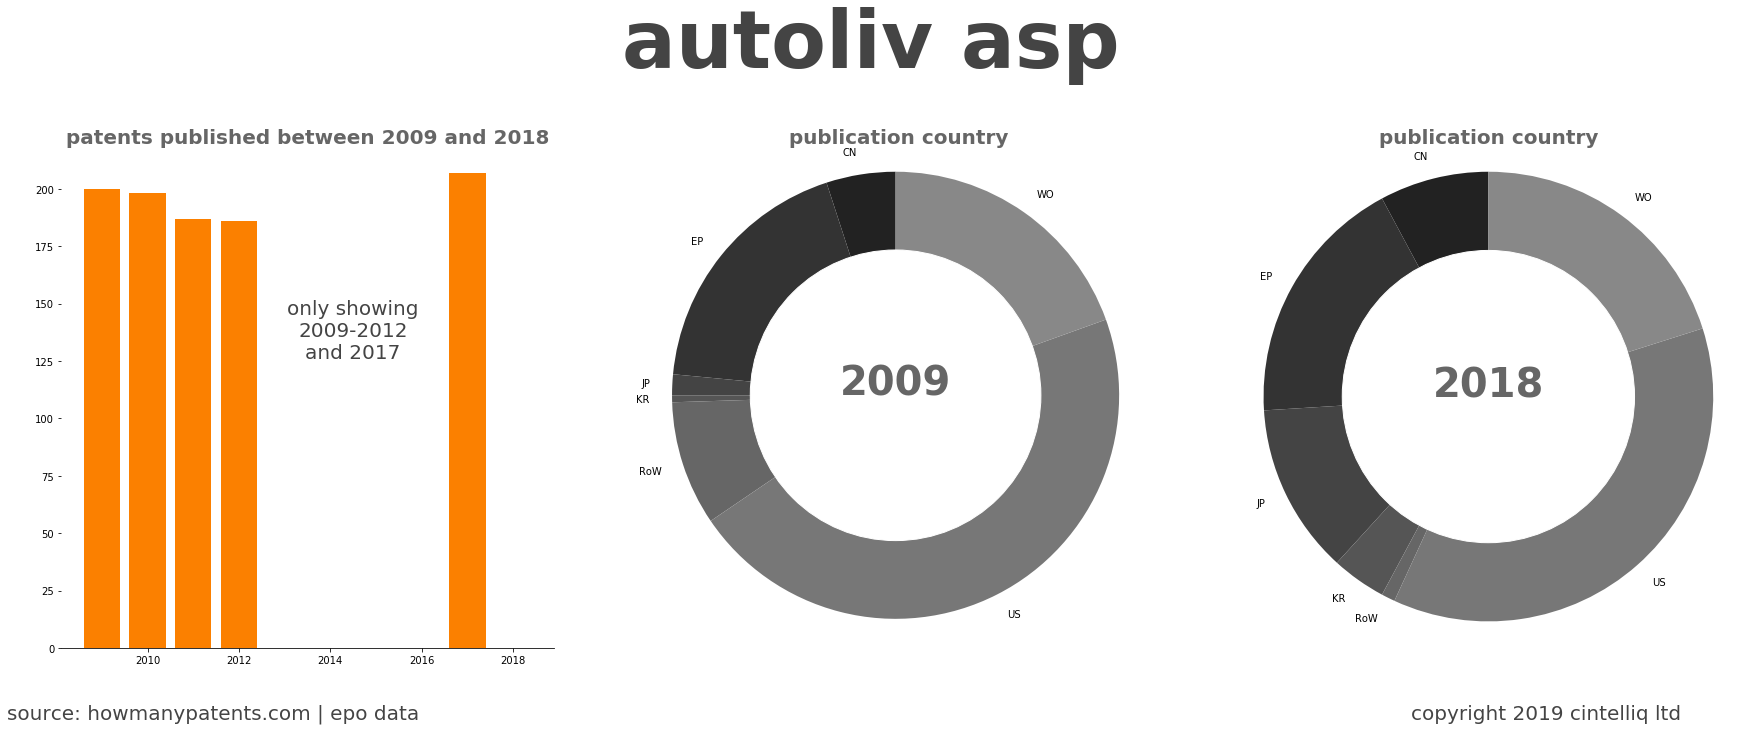 summary of patents for Autoliv Asp